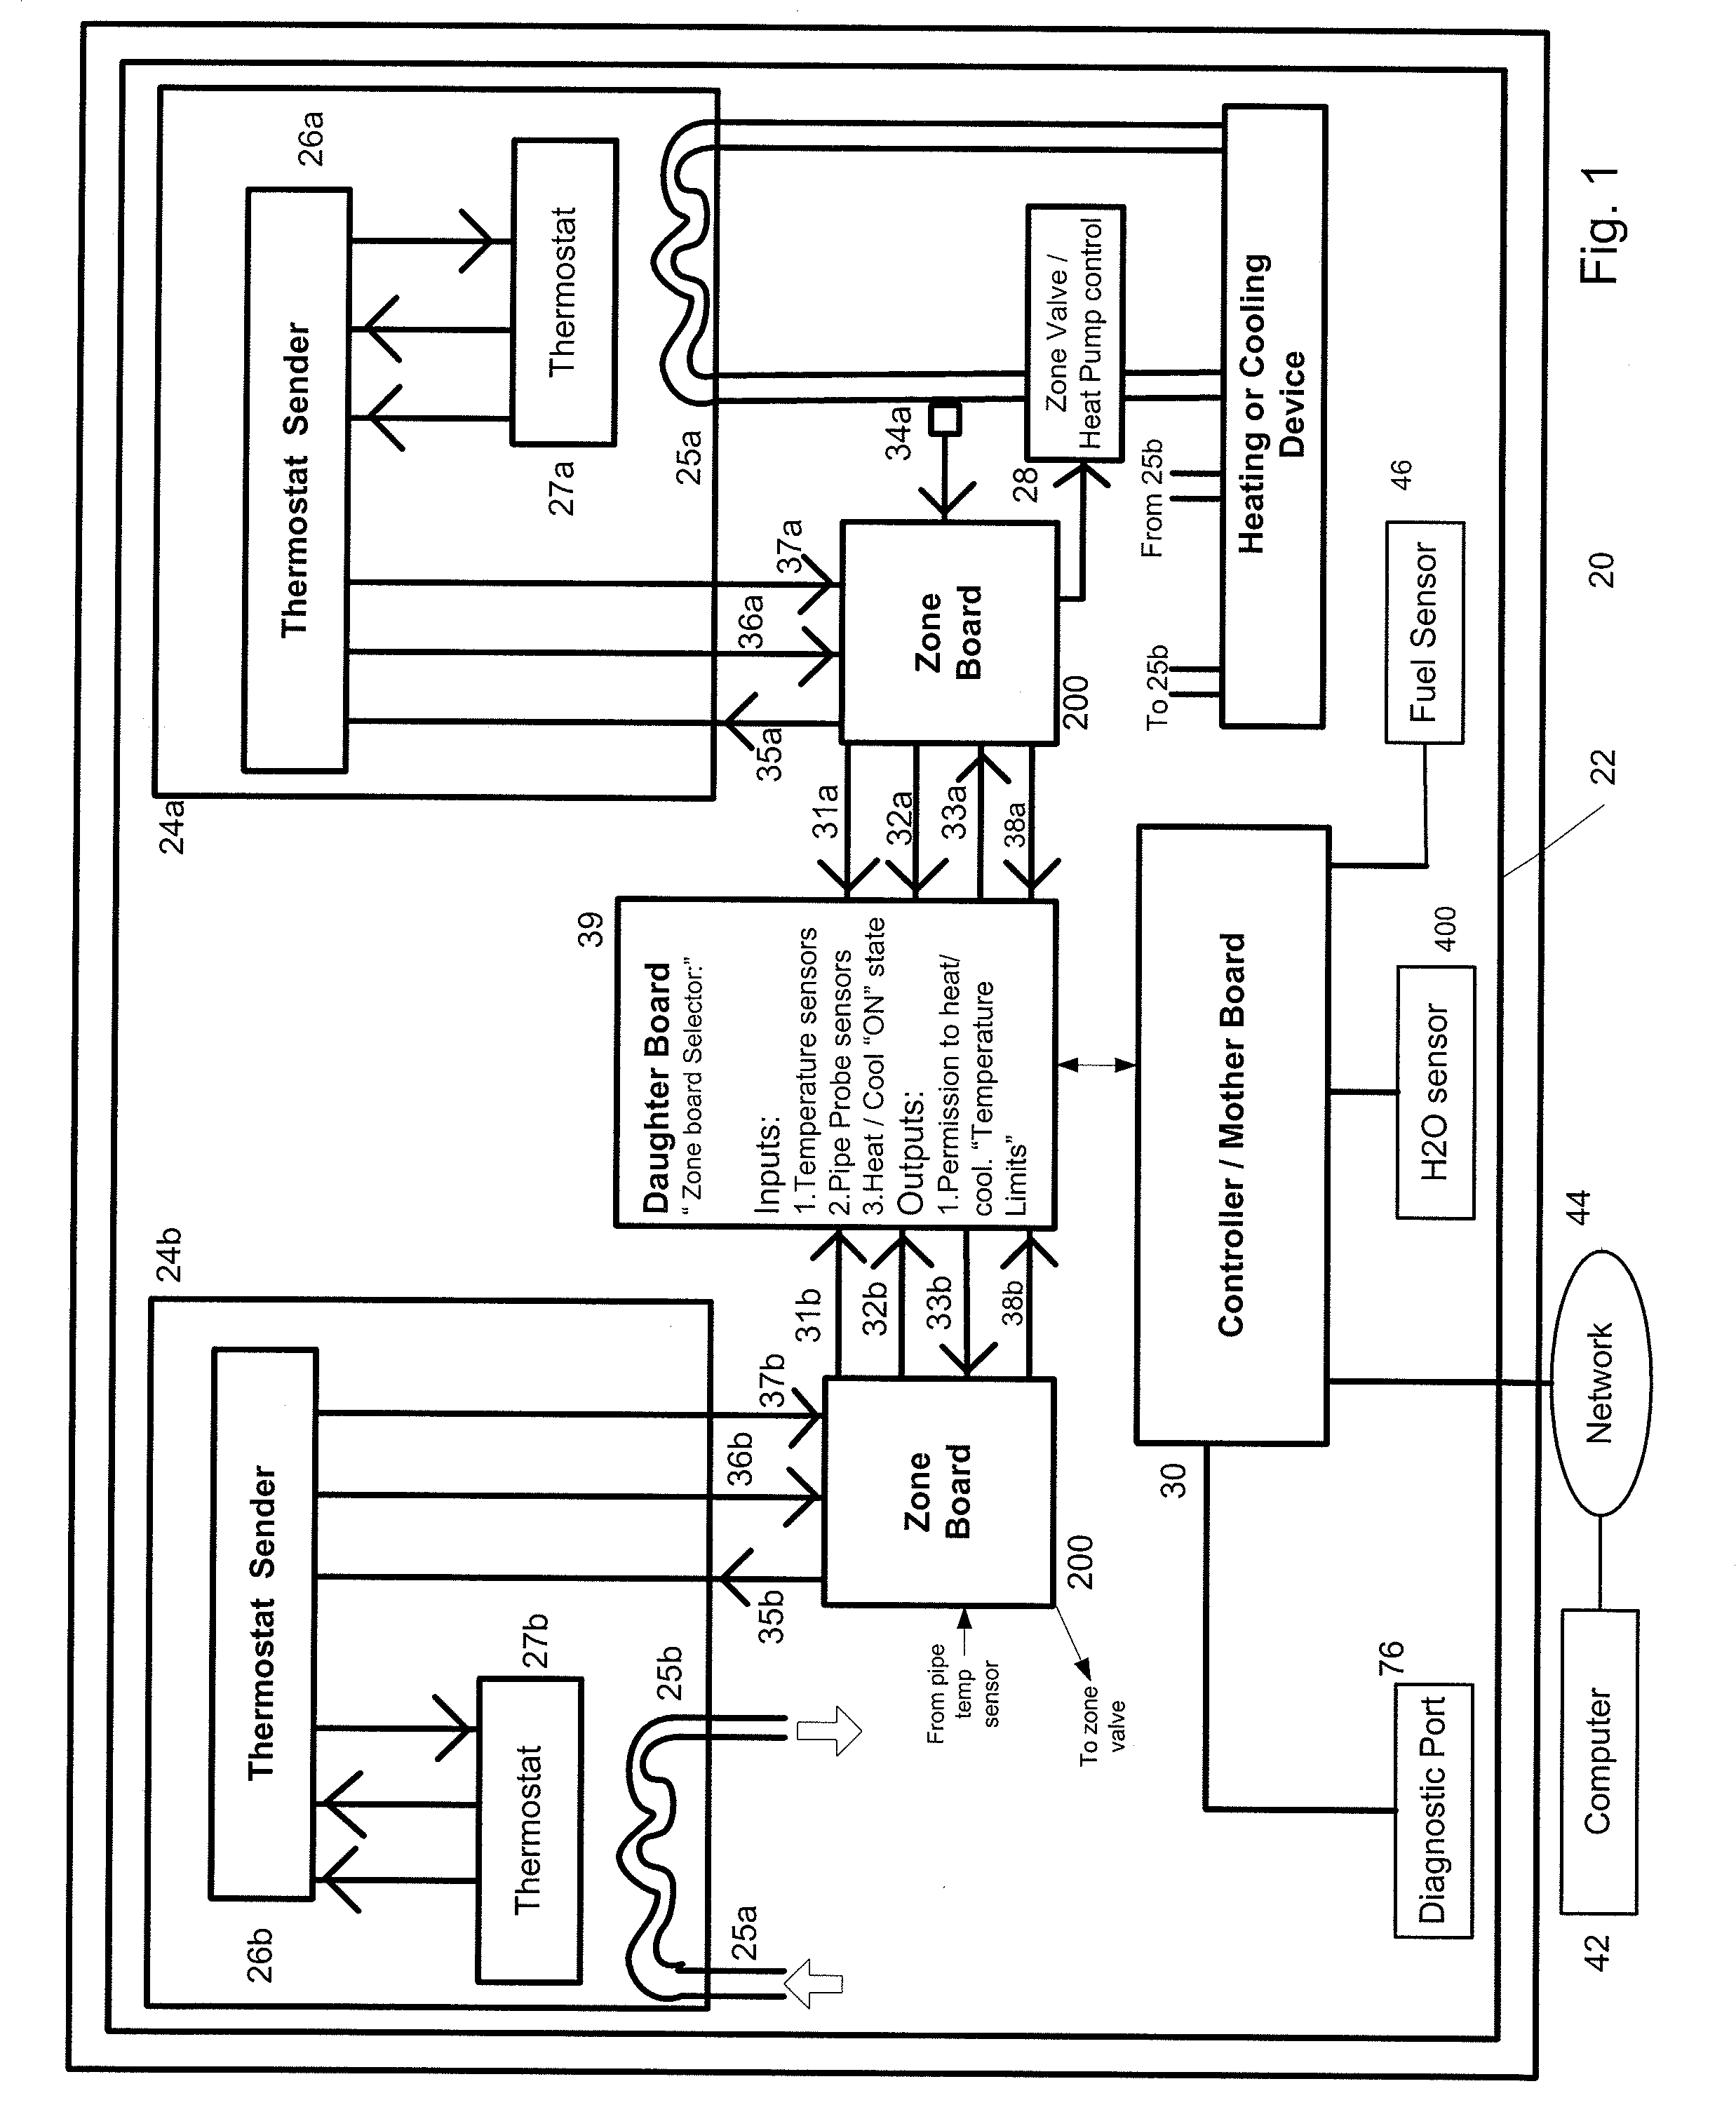 Systems and methods for monitoring, controlling and limiting usage of utilities